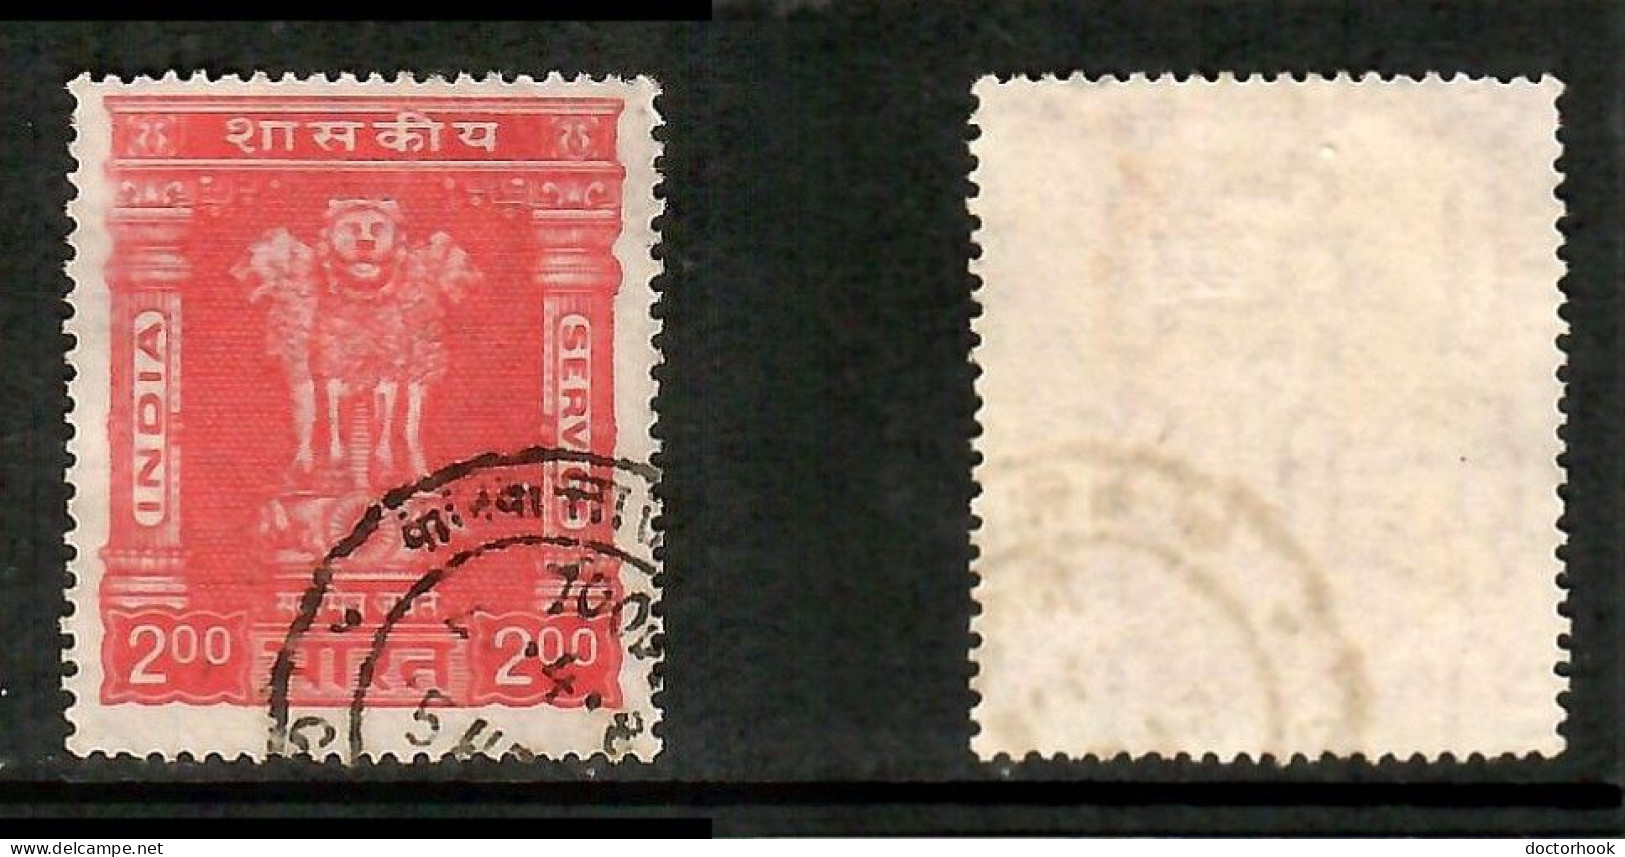 INDIA Scott # O 183 USED (CONDITION PER SCAN) (Stamp Scan # 1034-14) - Official Stamps